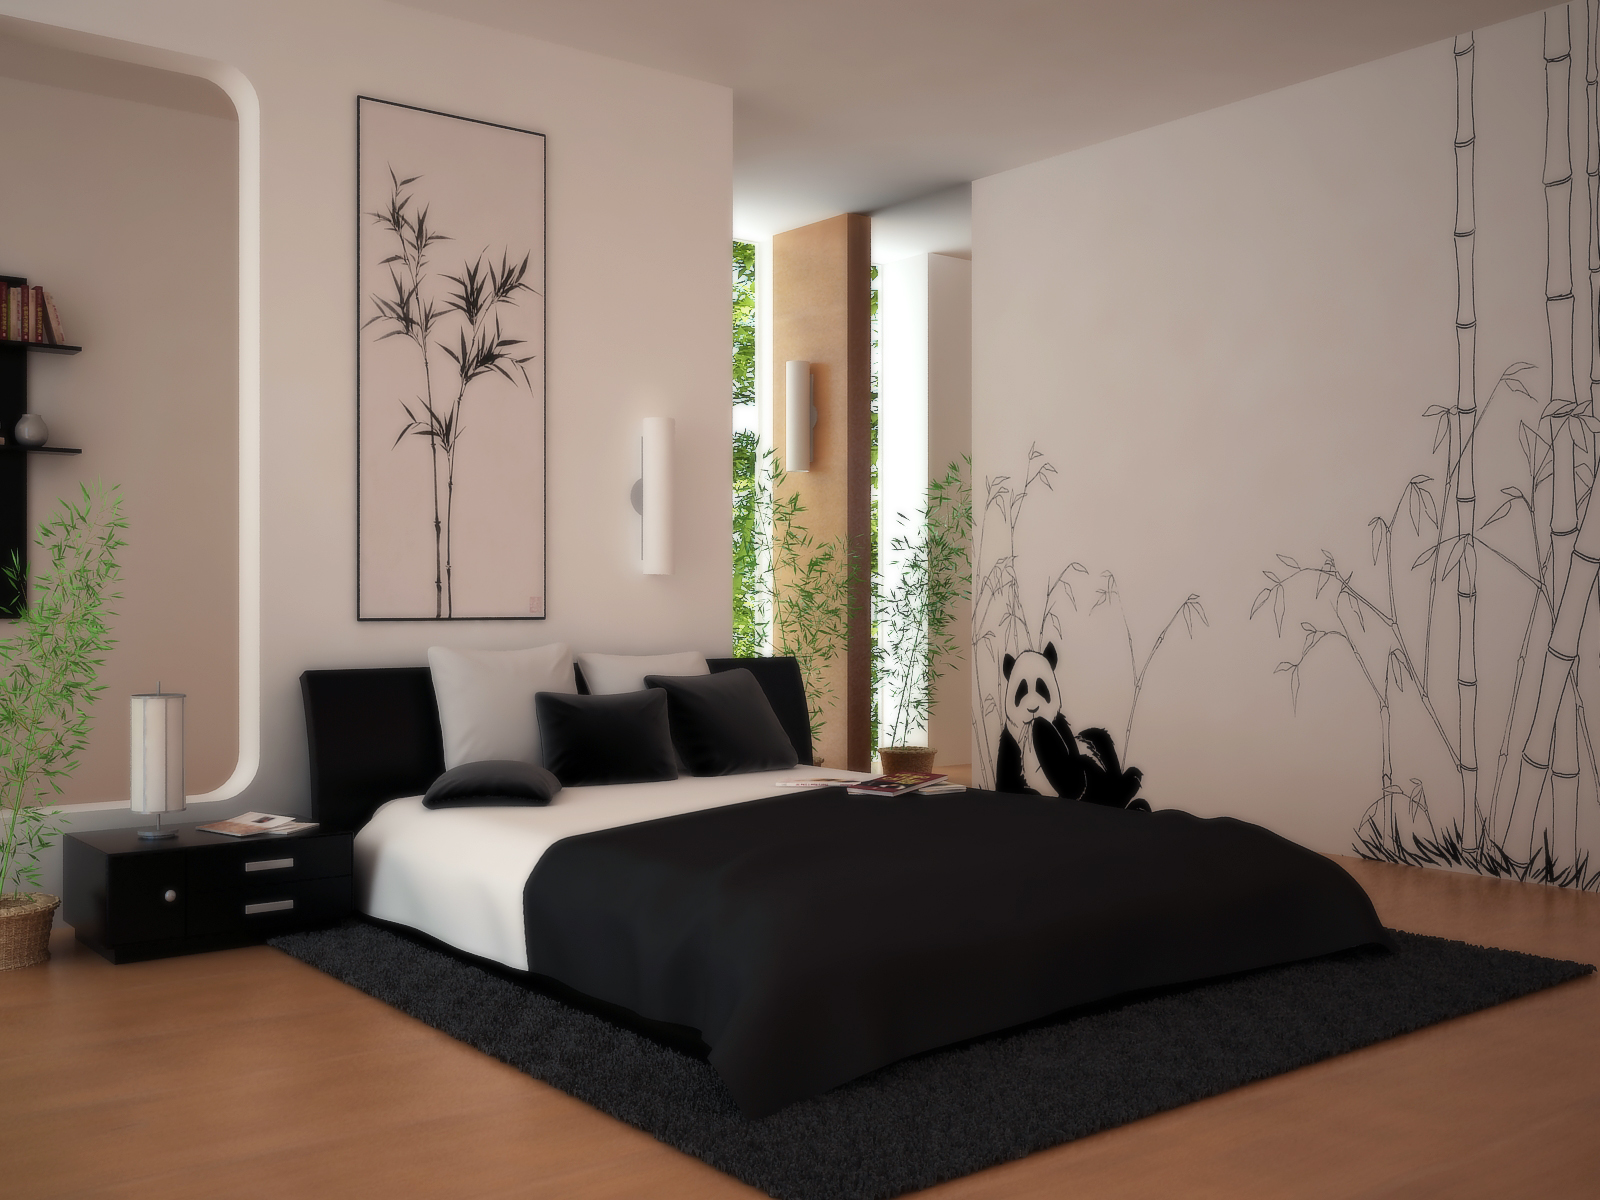 Fabulous Panda Escorted By Bamboos Bedroom Style Plan Escorted By Wall Painting And Completed Escorted By Queen Bed Applying White And Black Color Furnished Bedroom